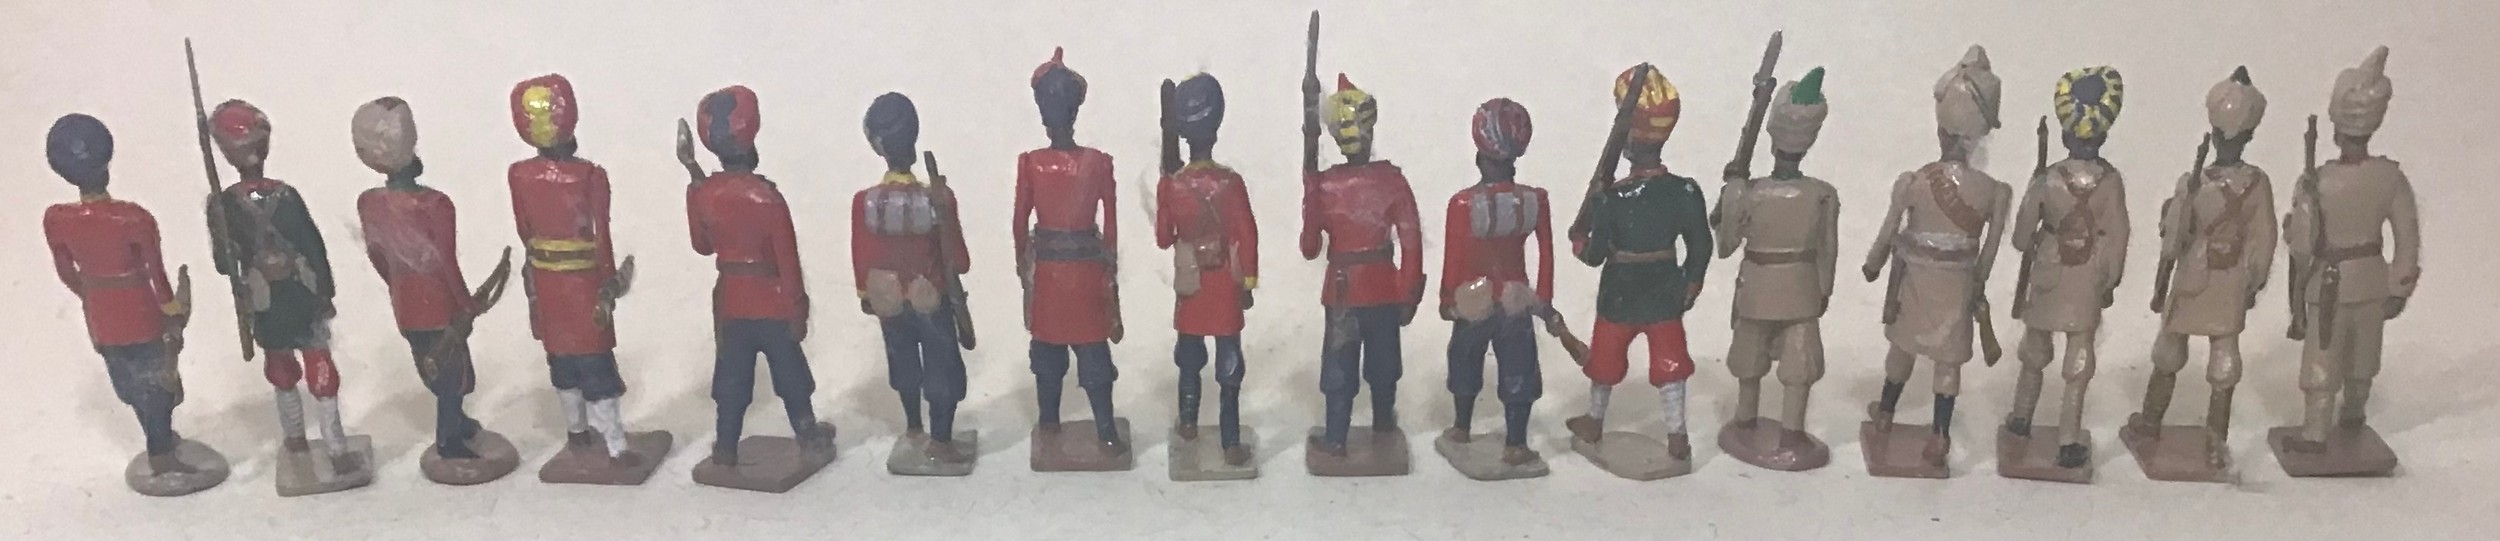 Lead soldiers Indian various regiments 1914 to include Dogras and Punjabi (16) - Image 2 of 4